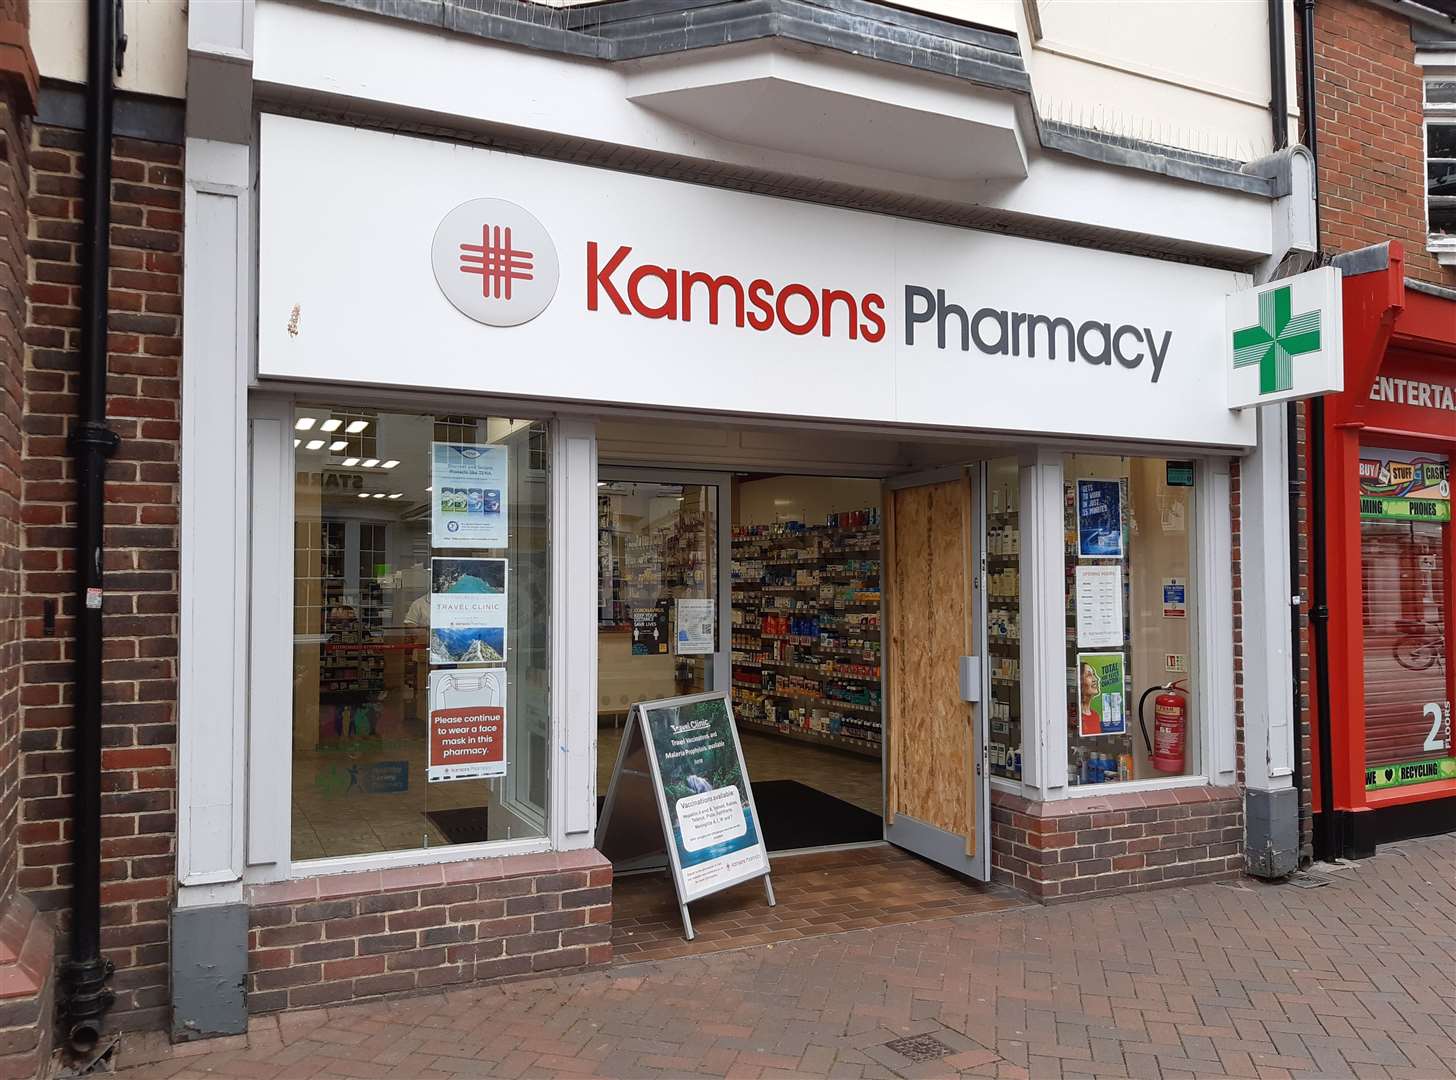 Damage caused to Kamsons Pharmacy in Ashford High Street during a suspected burglary